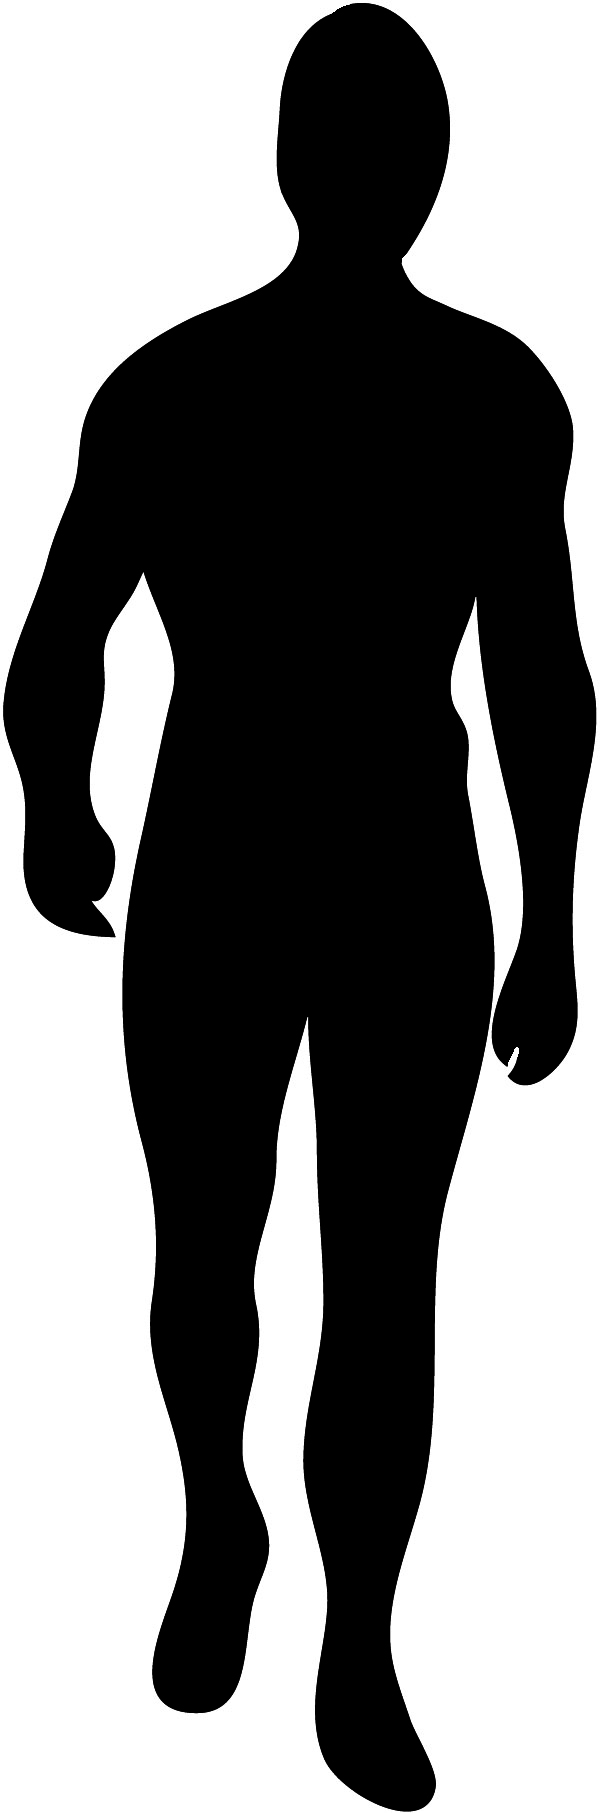 Male Body Silhouette Clip Art Vector Online Royalty Free on ...